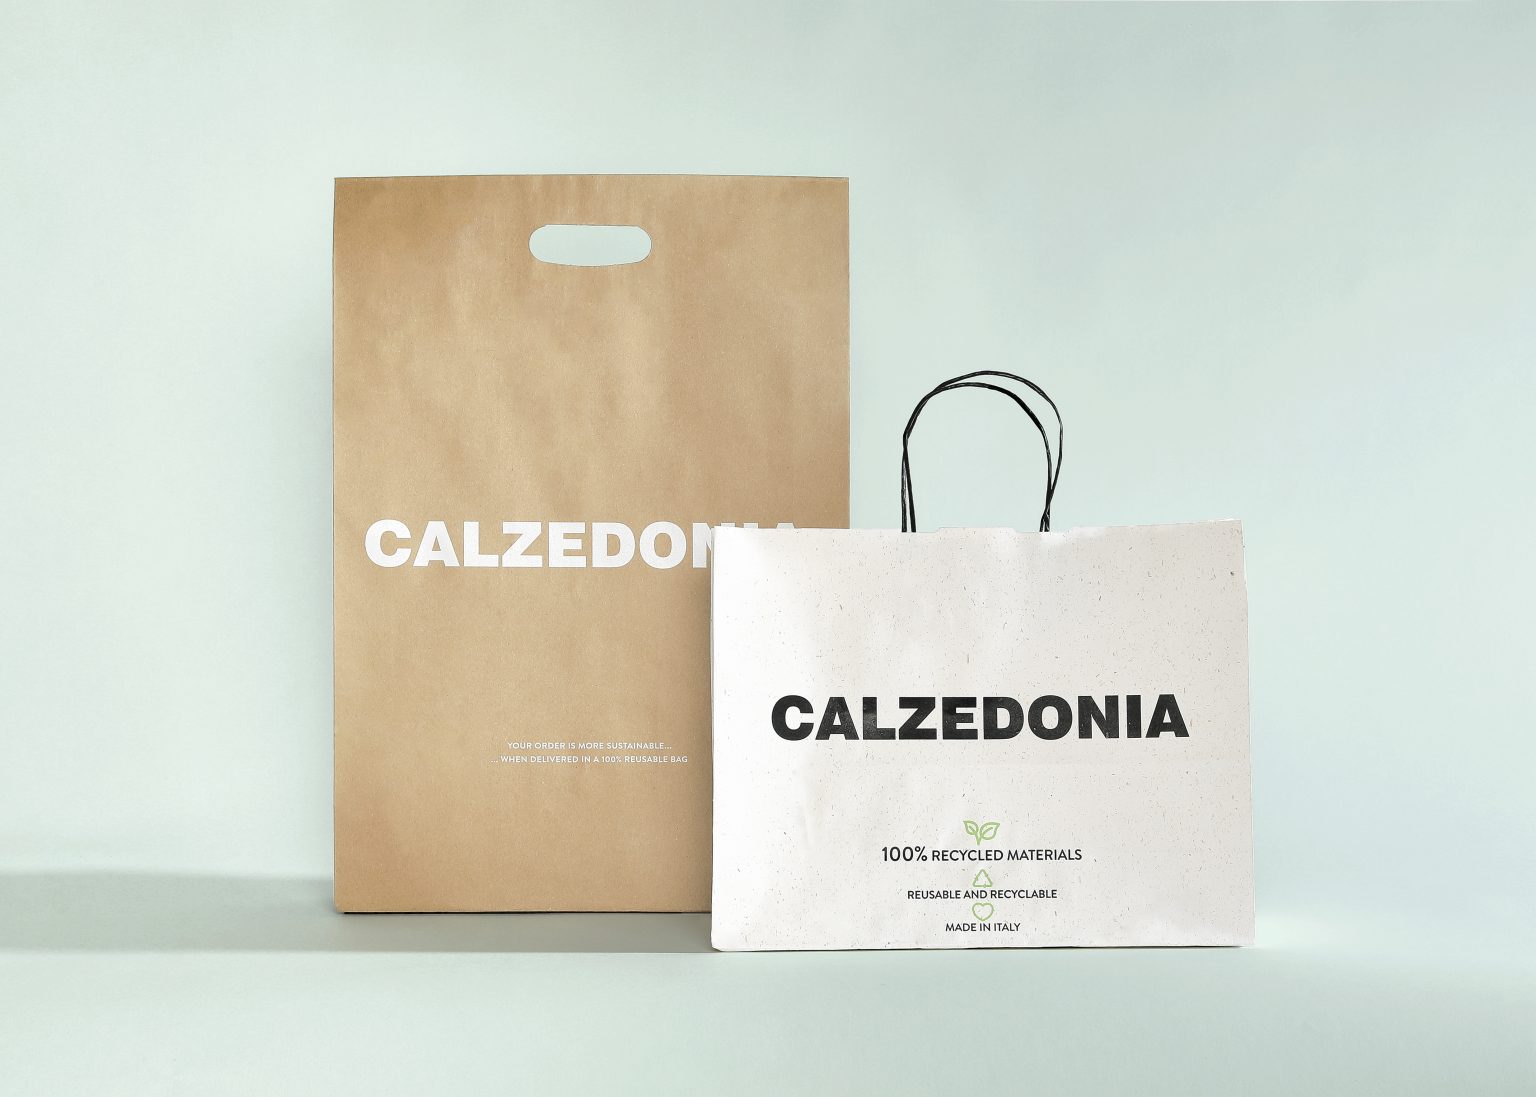 CALZEDONIA-FOR-THE-ENVIRONMENT.jpg